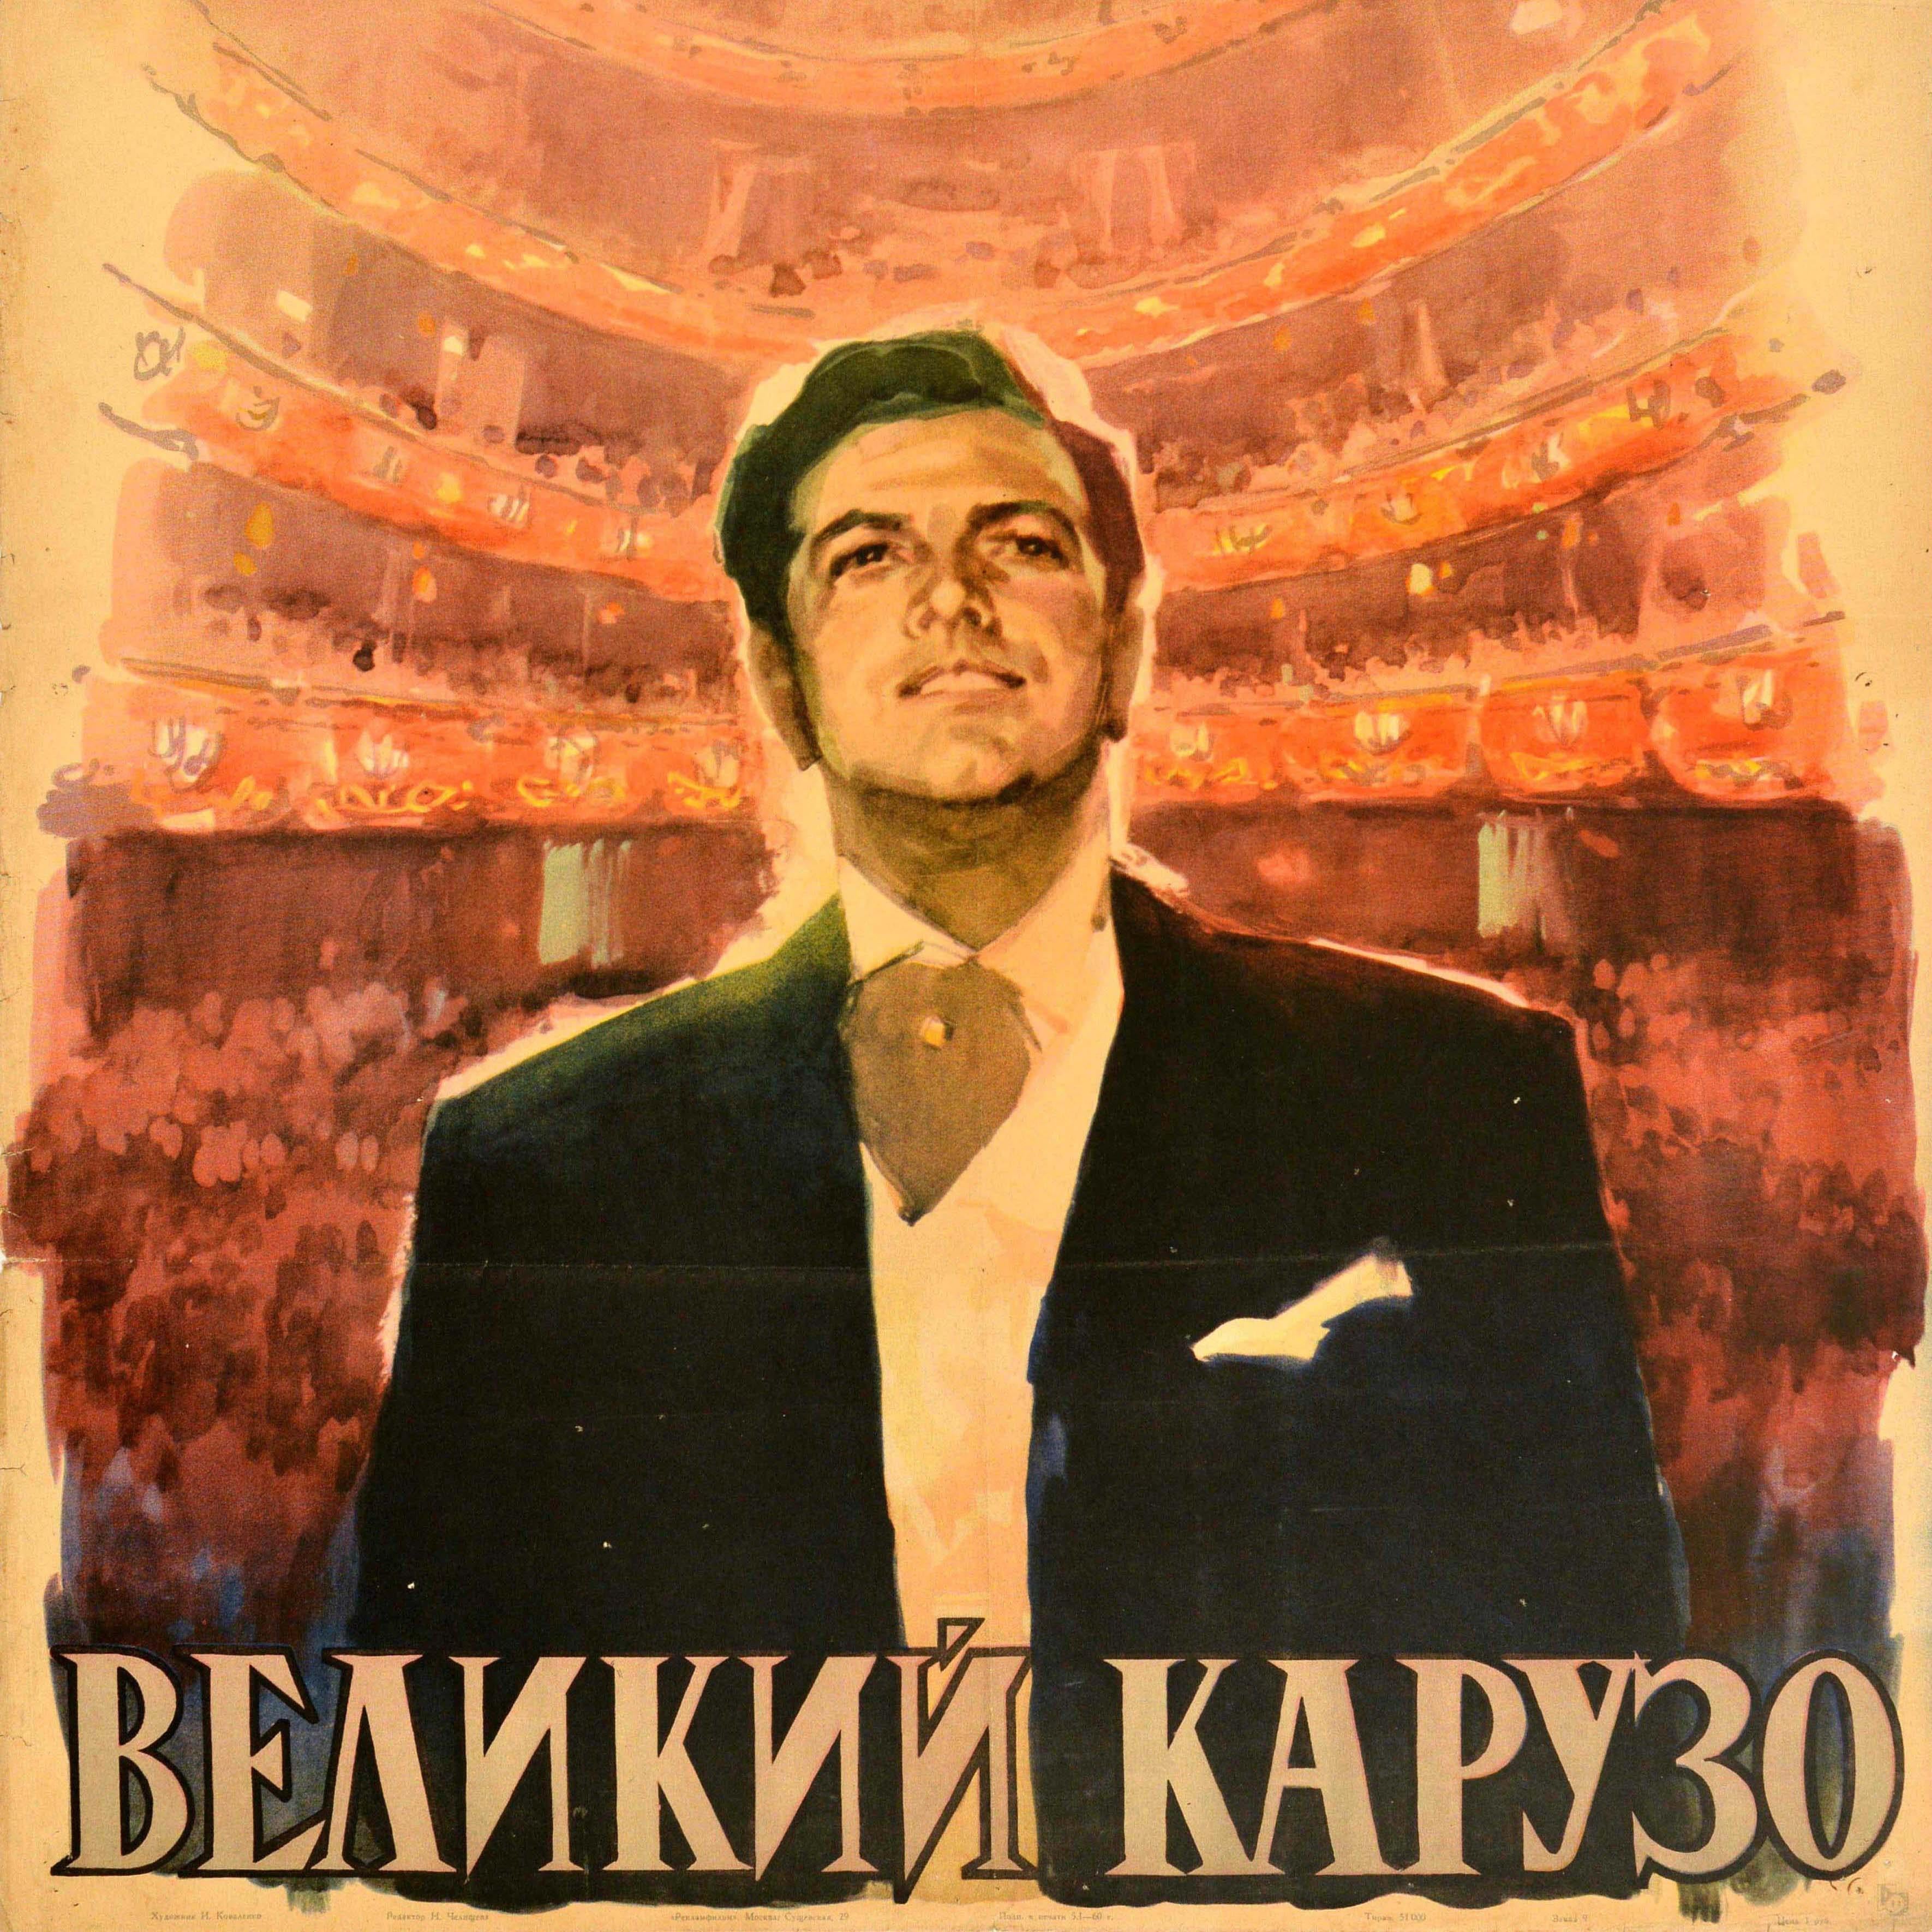 Original vintage movie poster for the Soviet release of the 1951 American biographical music drama about the Italian tenor Enrico Caruso (1873-1921): The Great Caruso / Великий Карузо - directed by Richard Thorpe and starring Mario Lanza in the lead